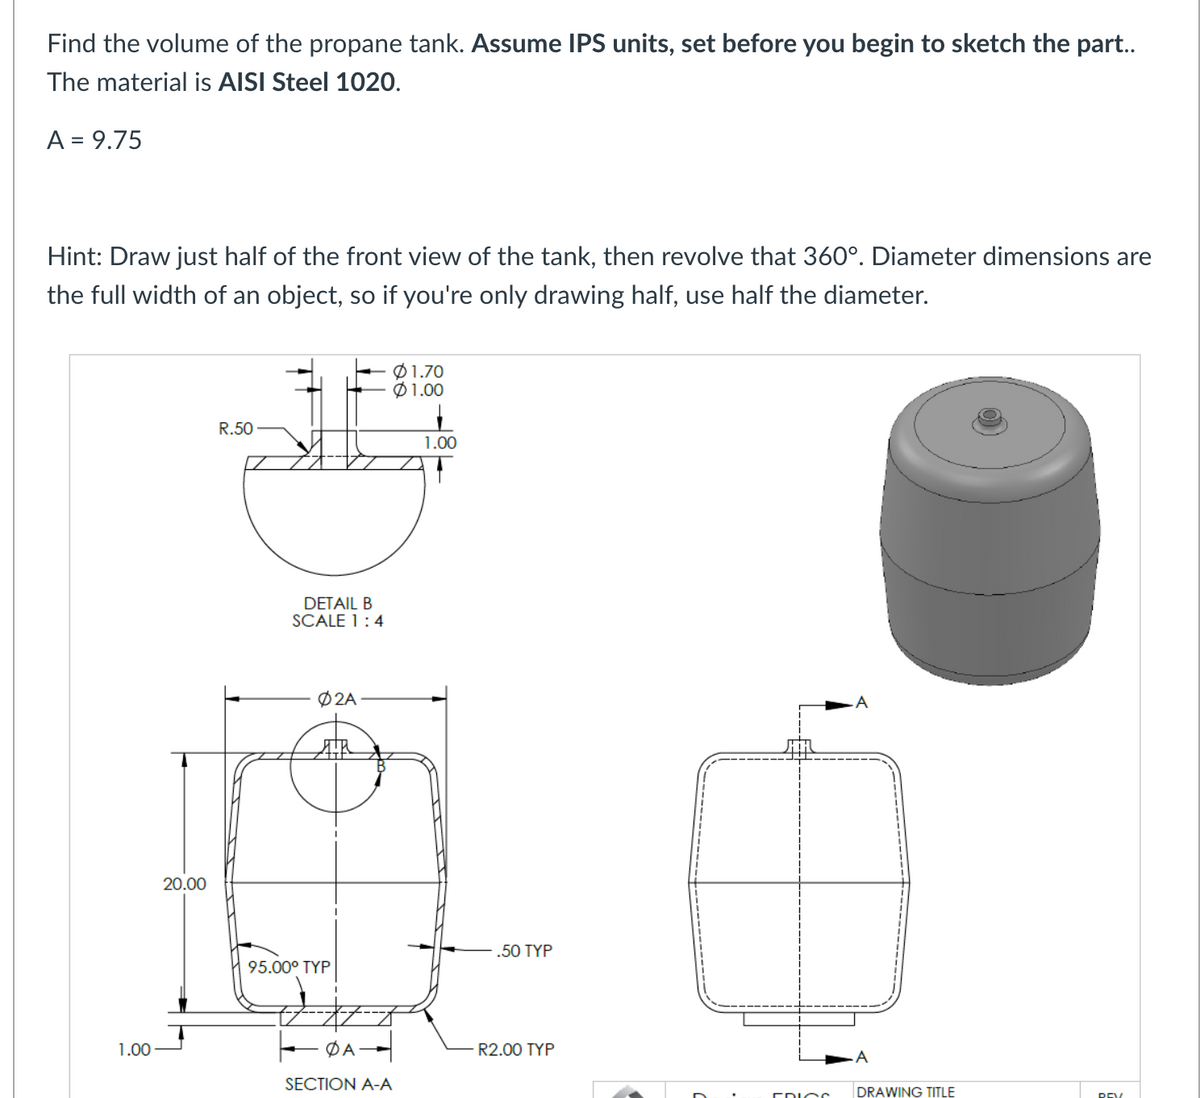 Find the volume of the propane tank. Assume IPS units, set before you begin to sketch the part..
The material is AISI Steel 1020.
A = 9.75
Hint: Draw just half of the front view of the tank, then revolve that 360°. Diameter dimensions are
the full width of an object, so if you're only drawing half, use half the diameter.
1.00
20.00
R.50
DETAIL B
SCALE 1:4
02A
95.00⁰ TYP
I
01.70
$1.00
ΦΑ
SECTION A-A
1.00
.50 TYP
R2.00 TYP
FRIGO
A
A
DRAWING TITLE
REV